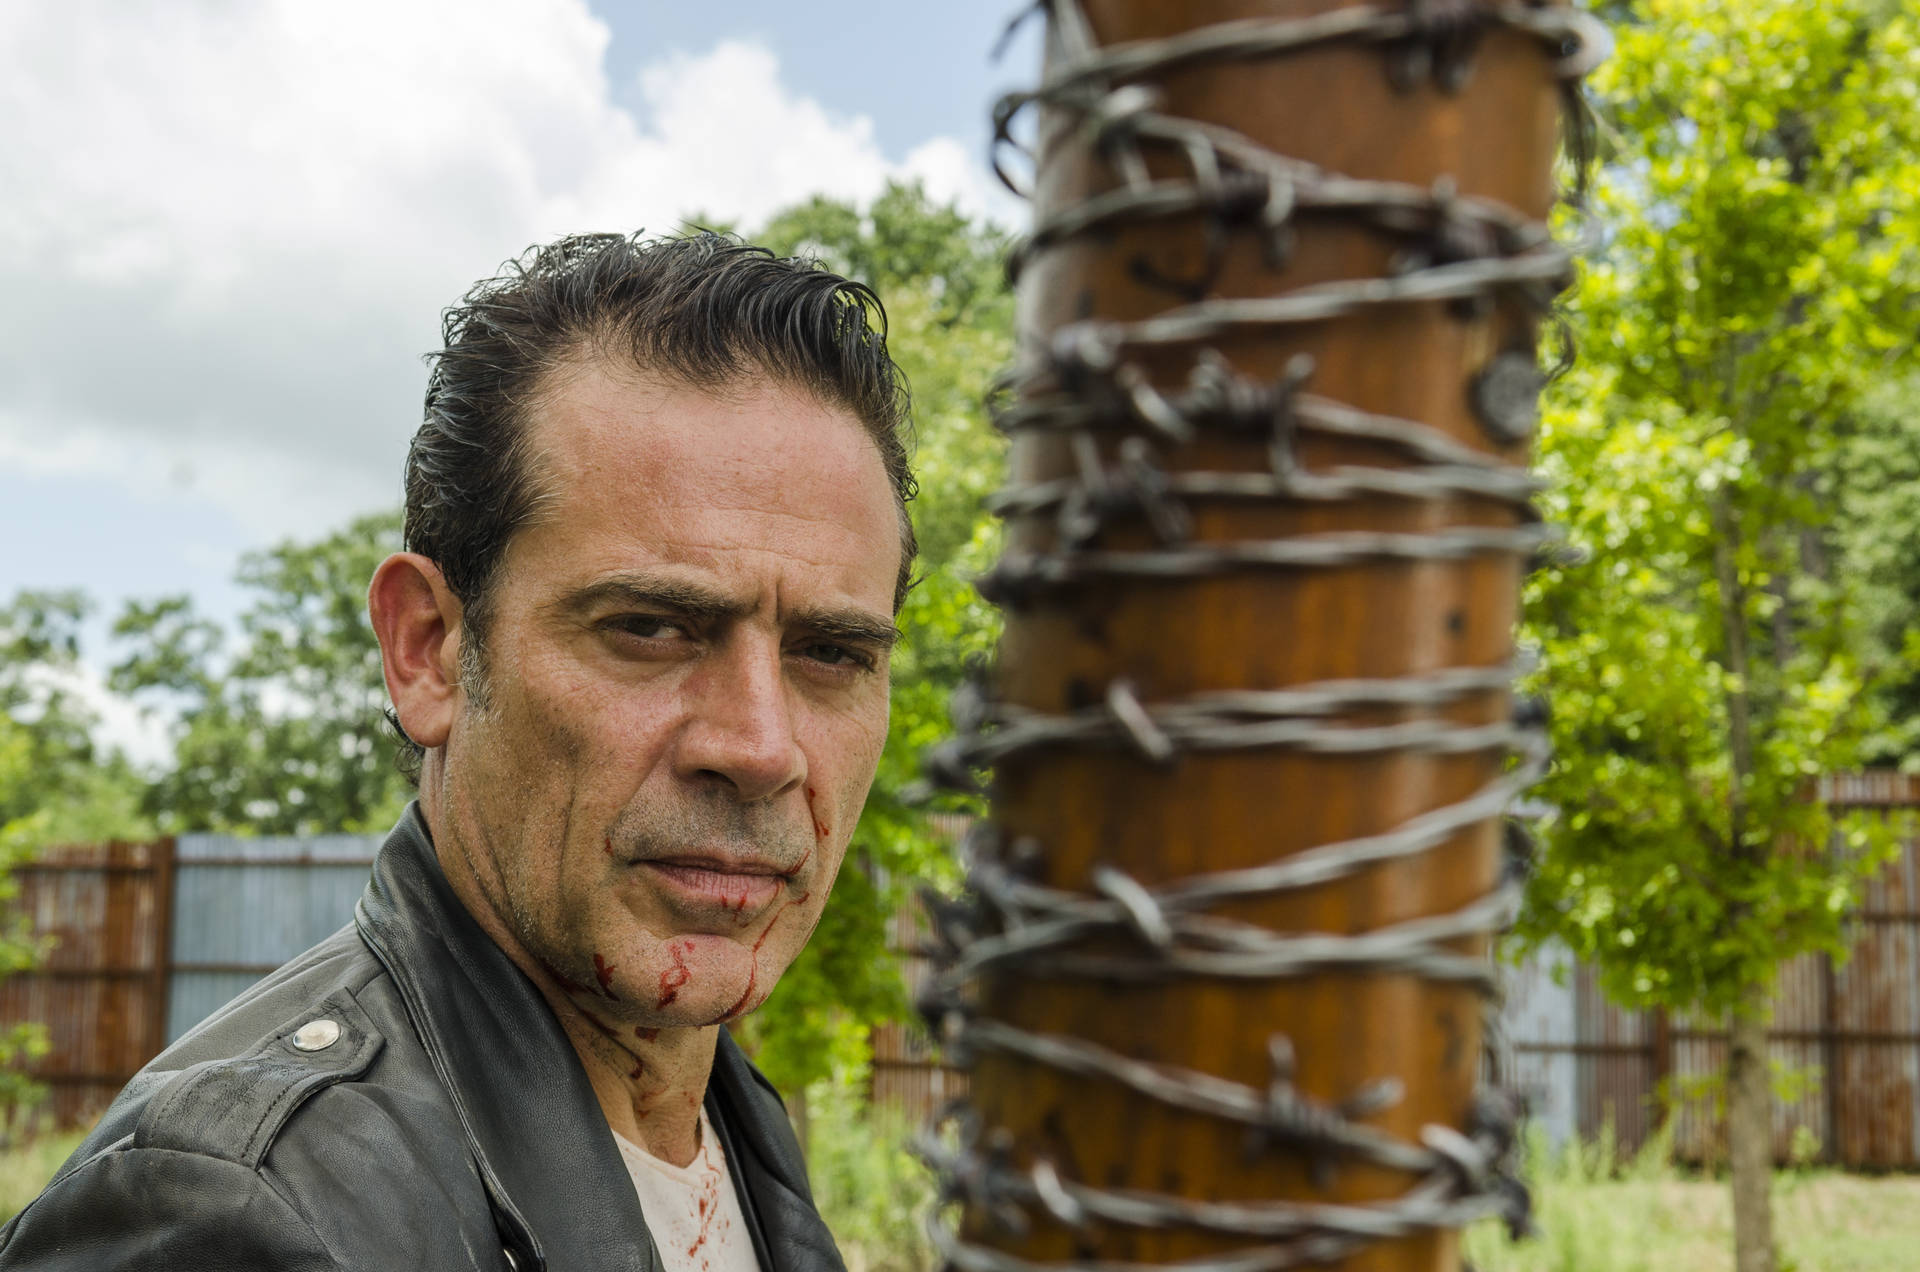 Negan's Bat Wrapped With Barbed Wire